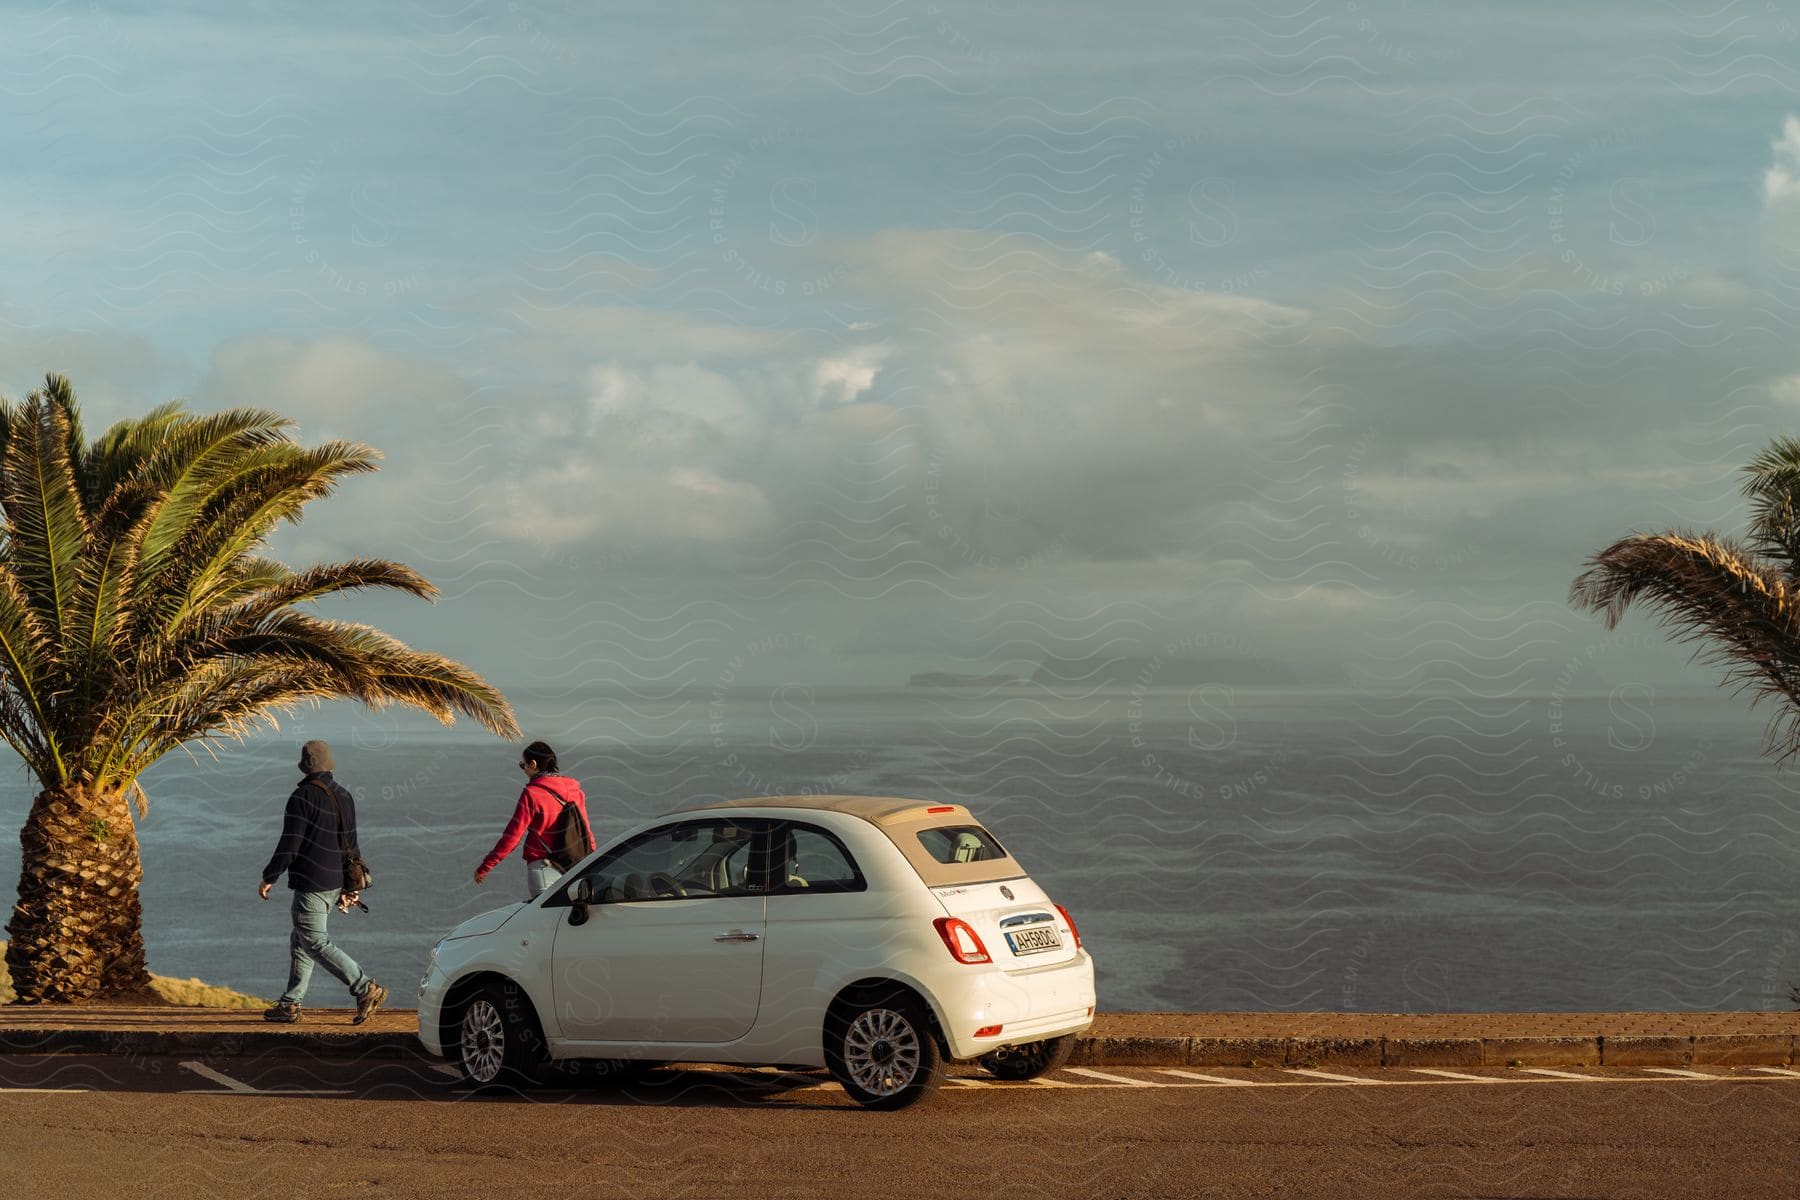 Two people walk near a parked automobile along the coast